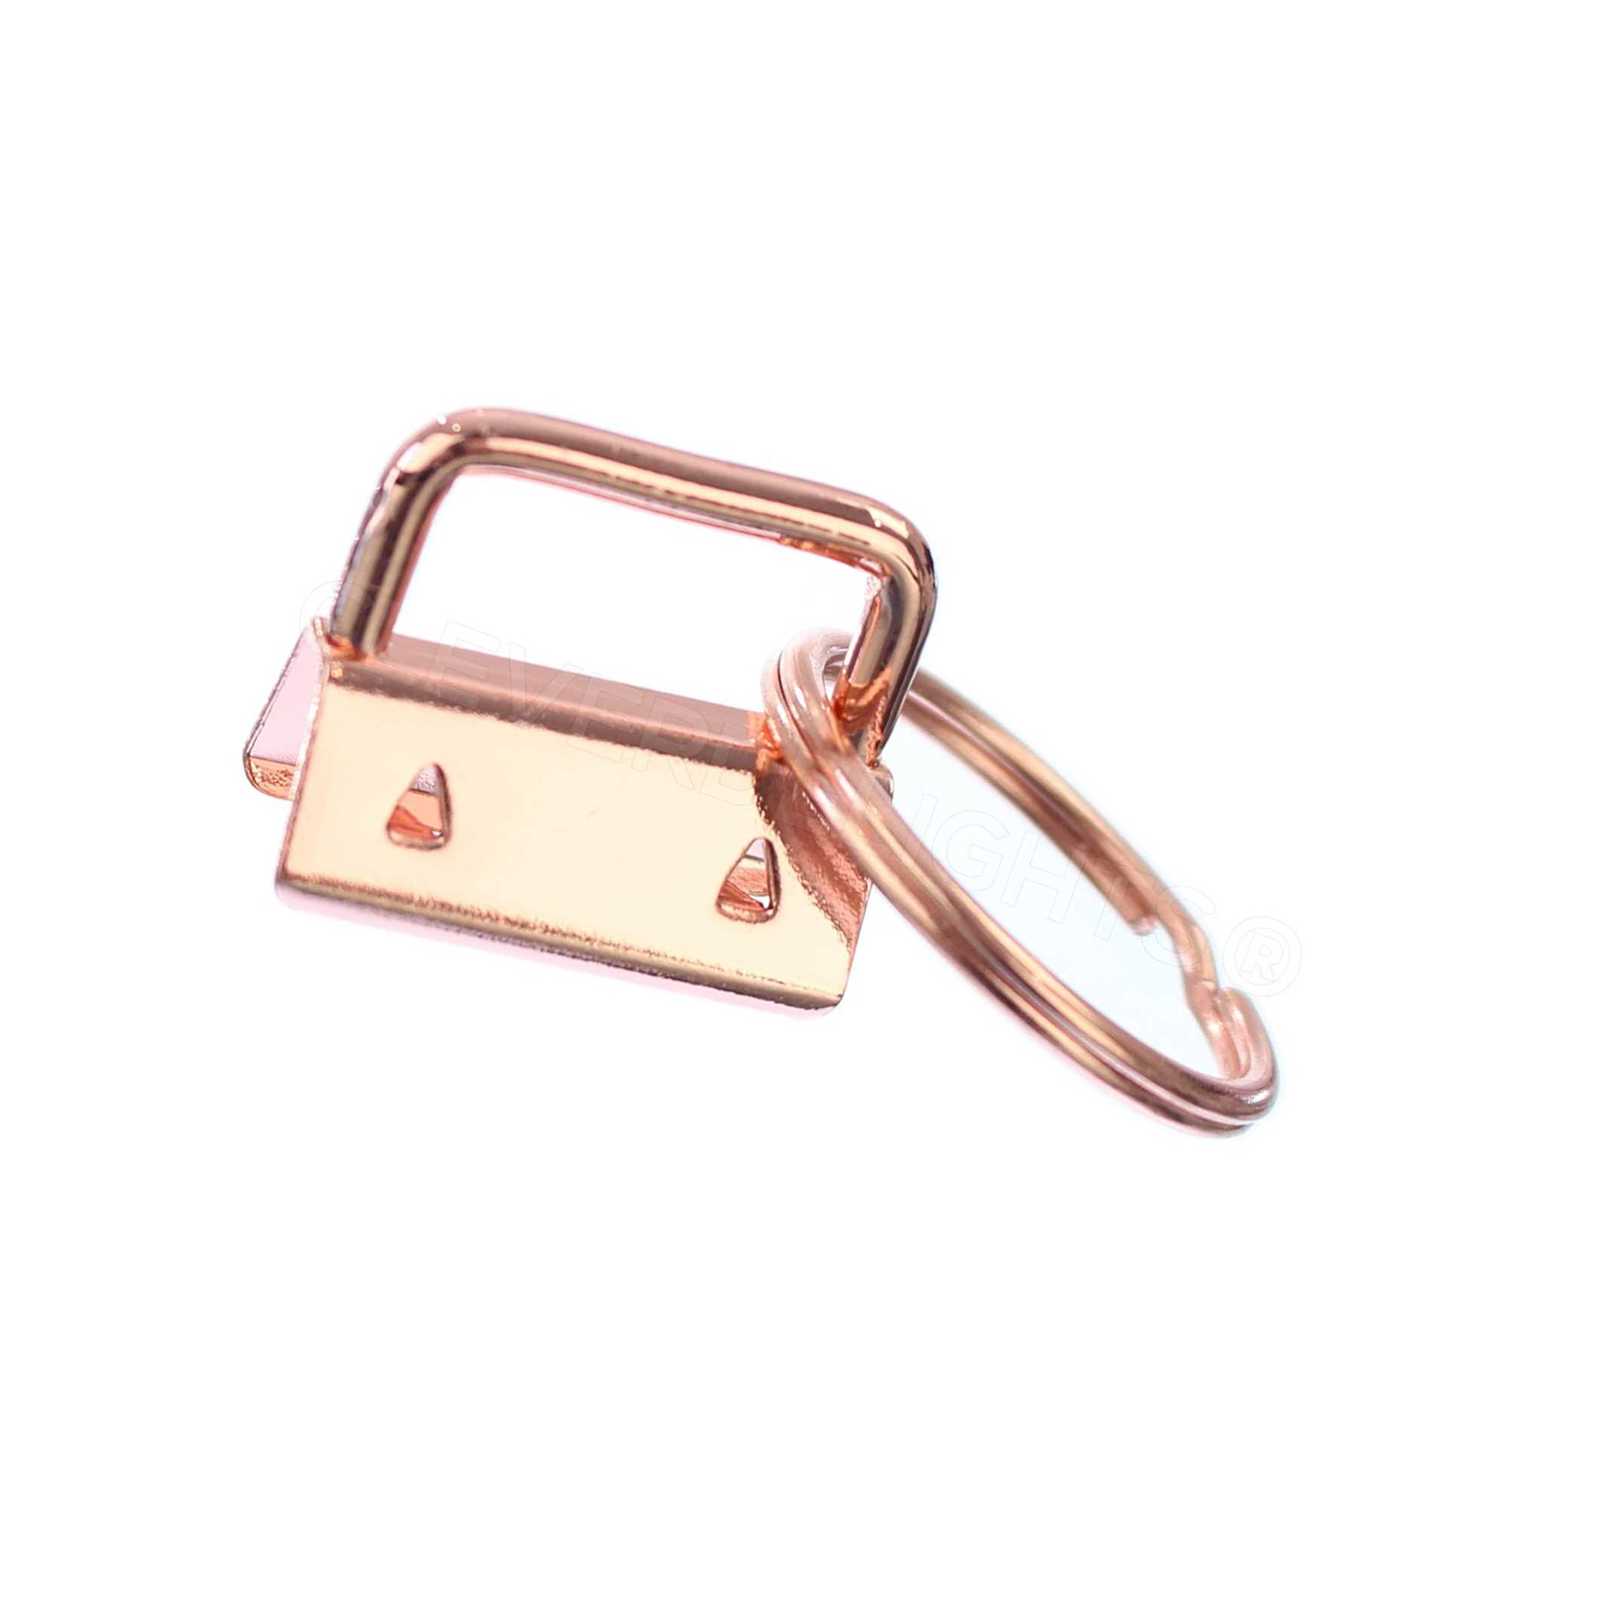 25 Pack - Clevers 1 Key Fob Hardware Set With Key S - Rose Gold Color - For